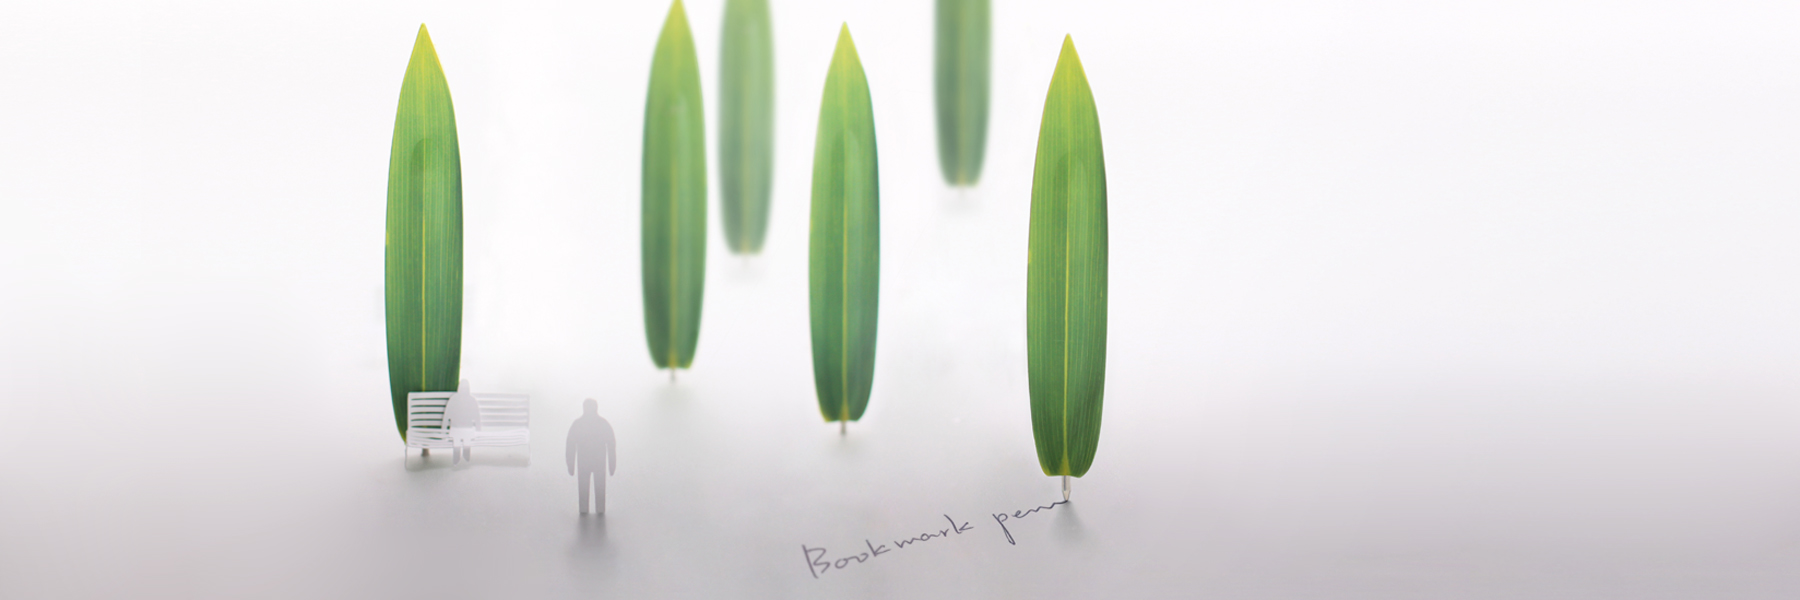 the ‘bookmark-pen’ camouflages as a leaf within your book